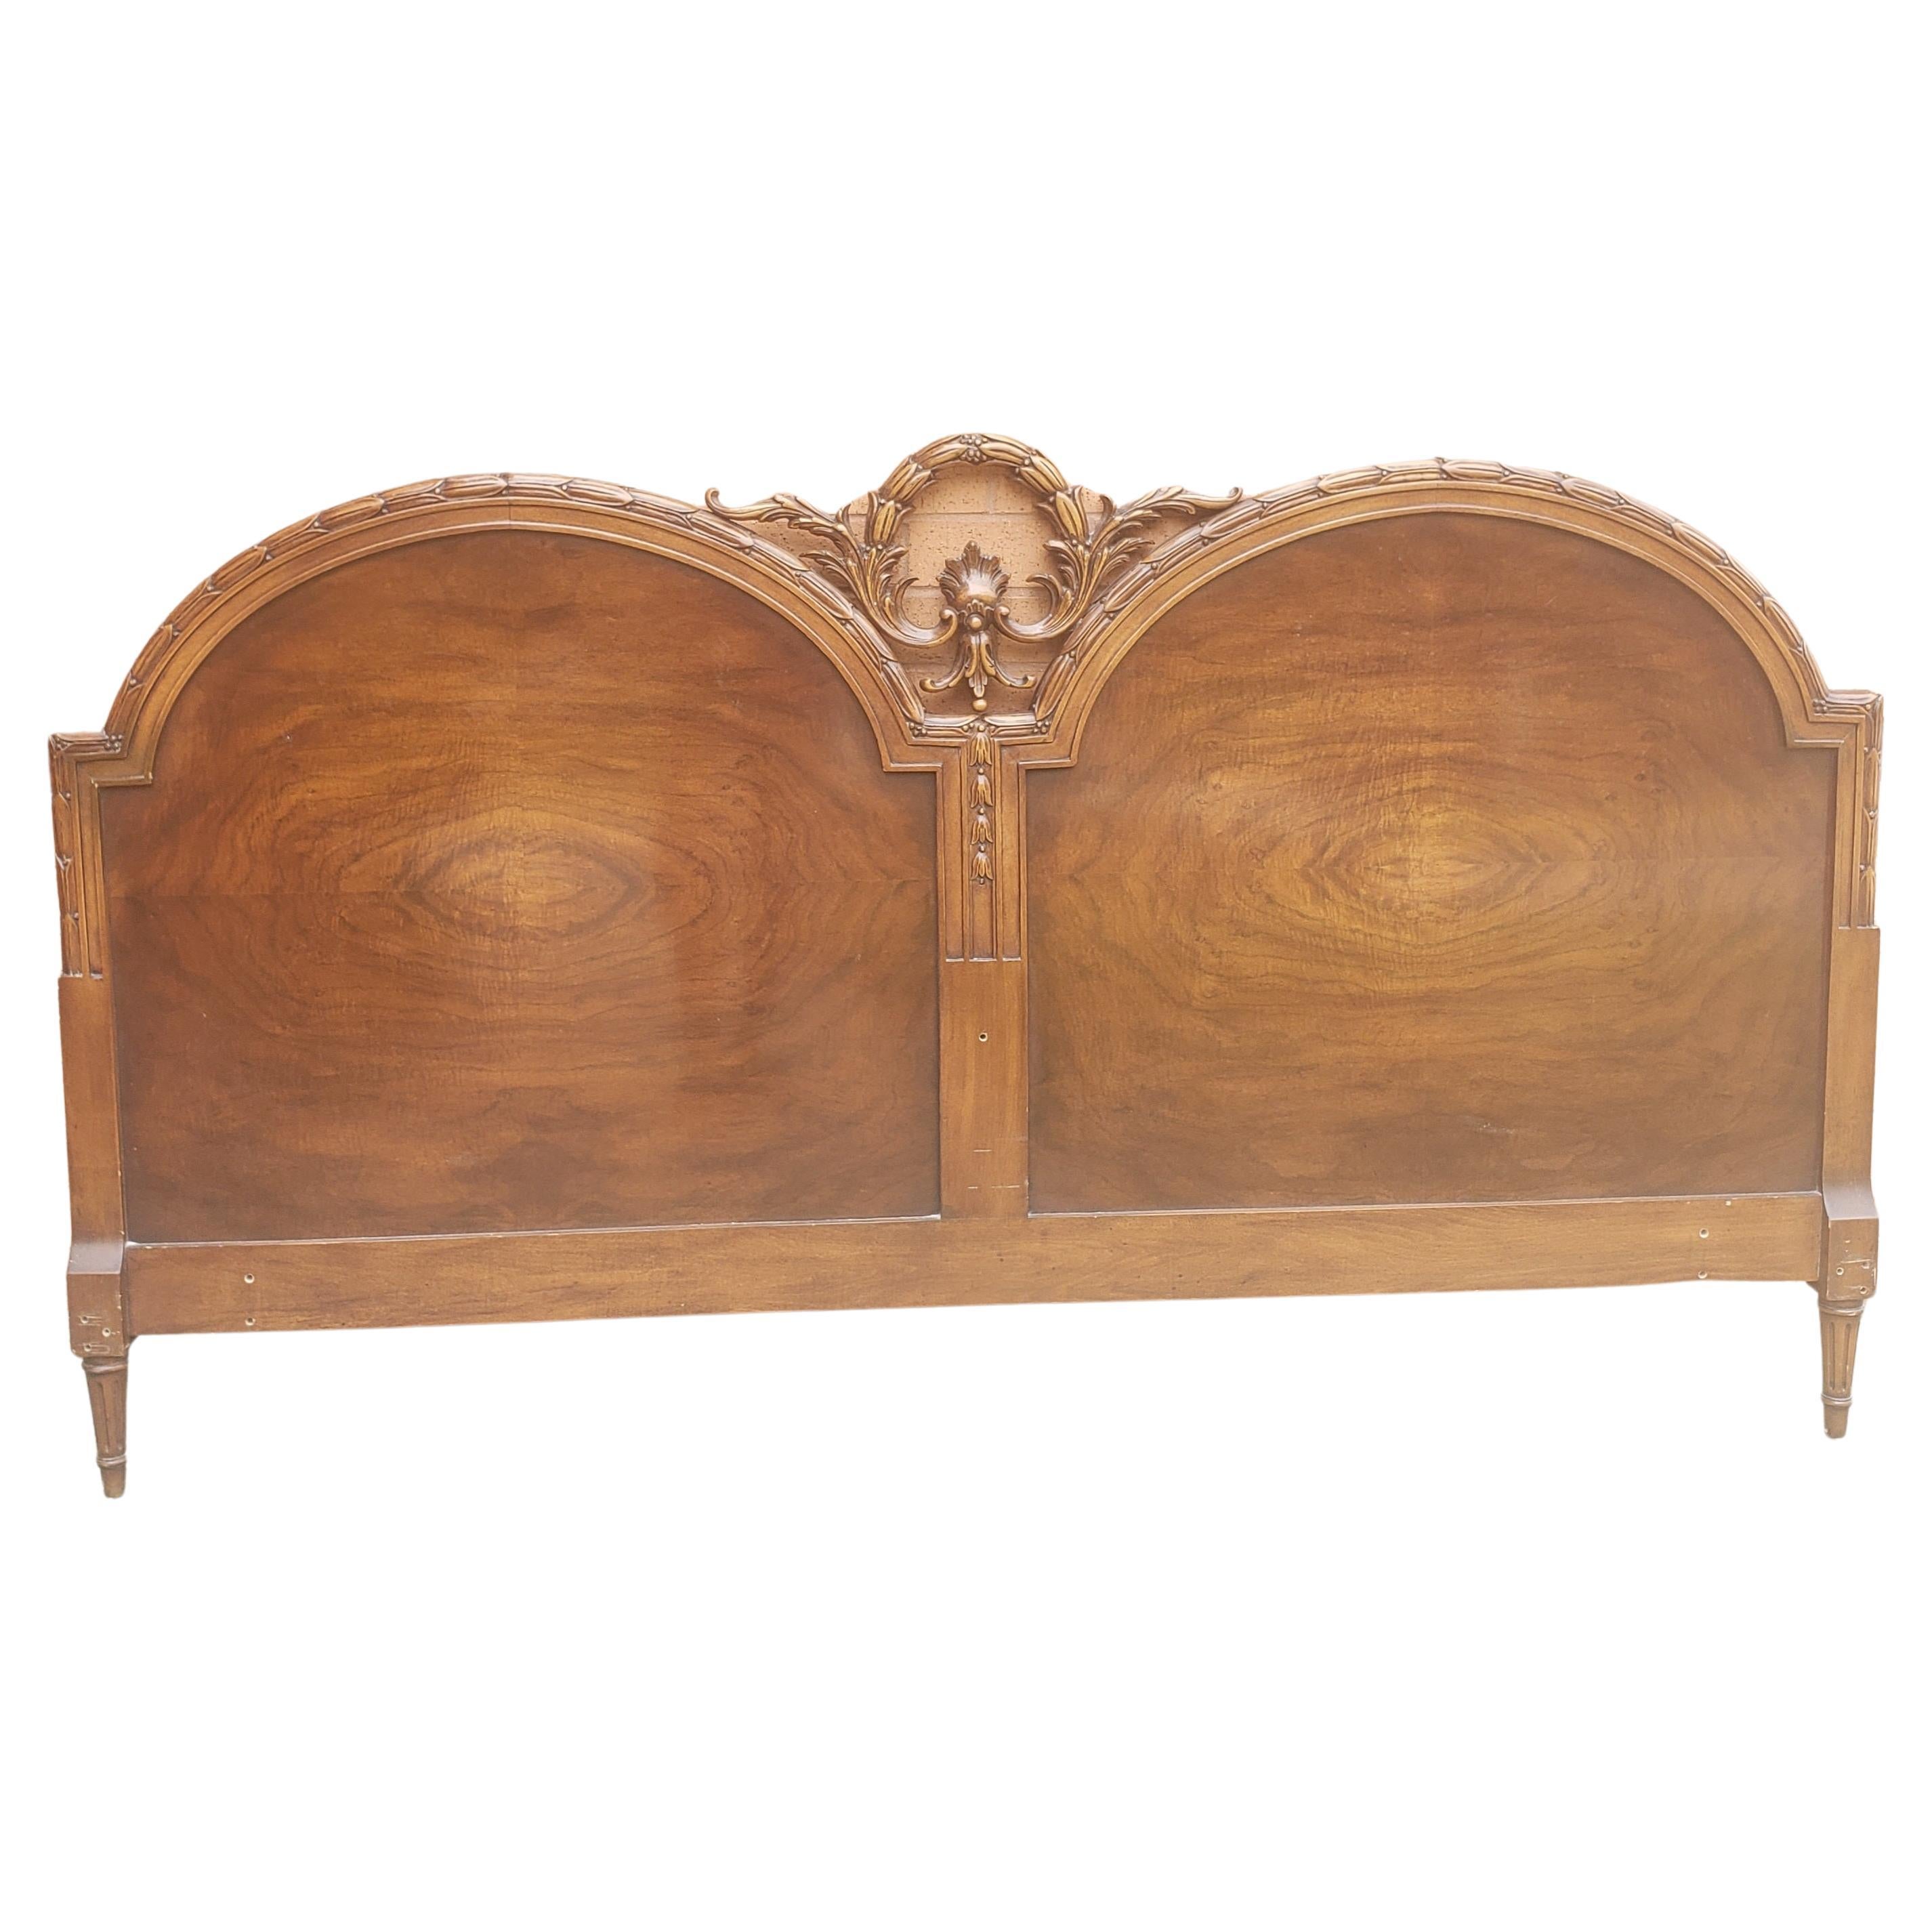 Baroque Revival French Baroque Style Carved Mahogany King Size Headboard